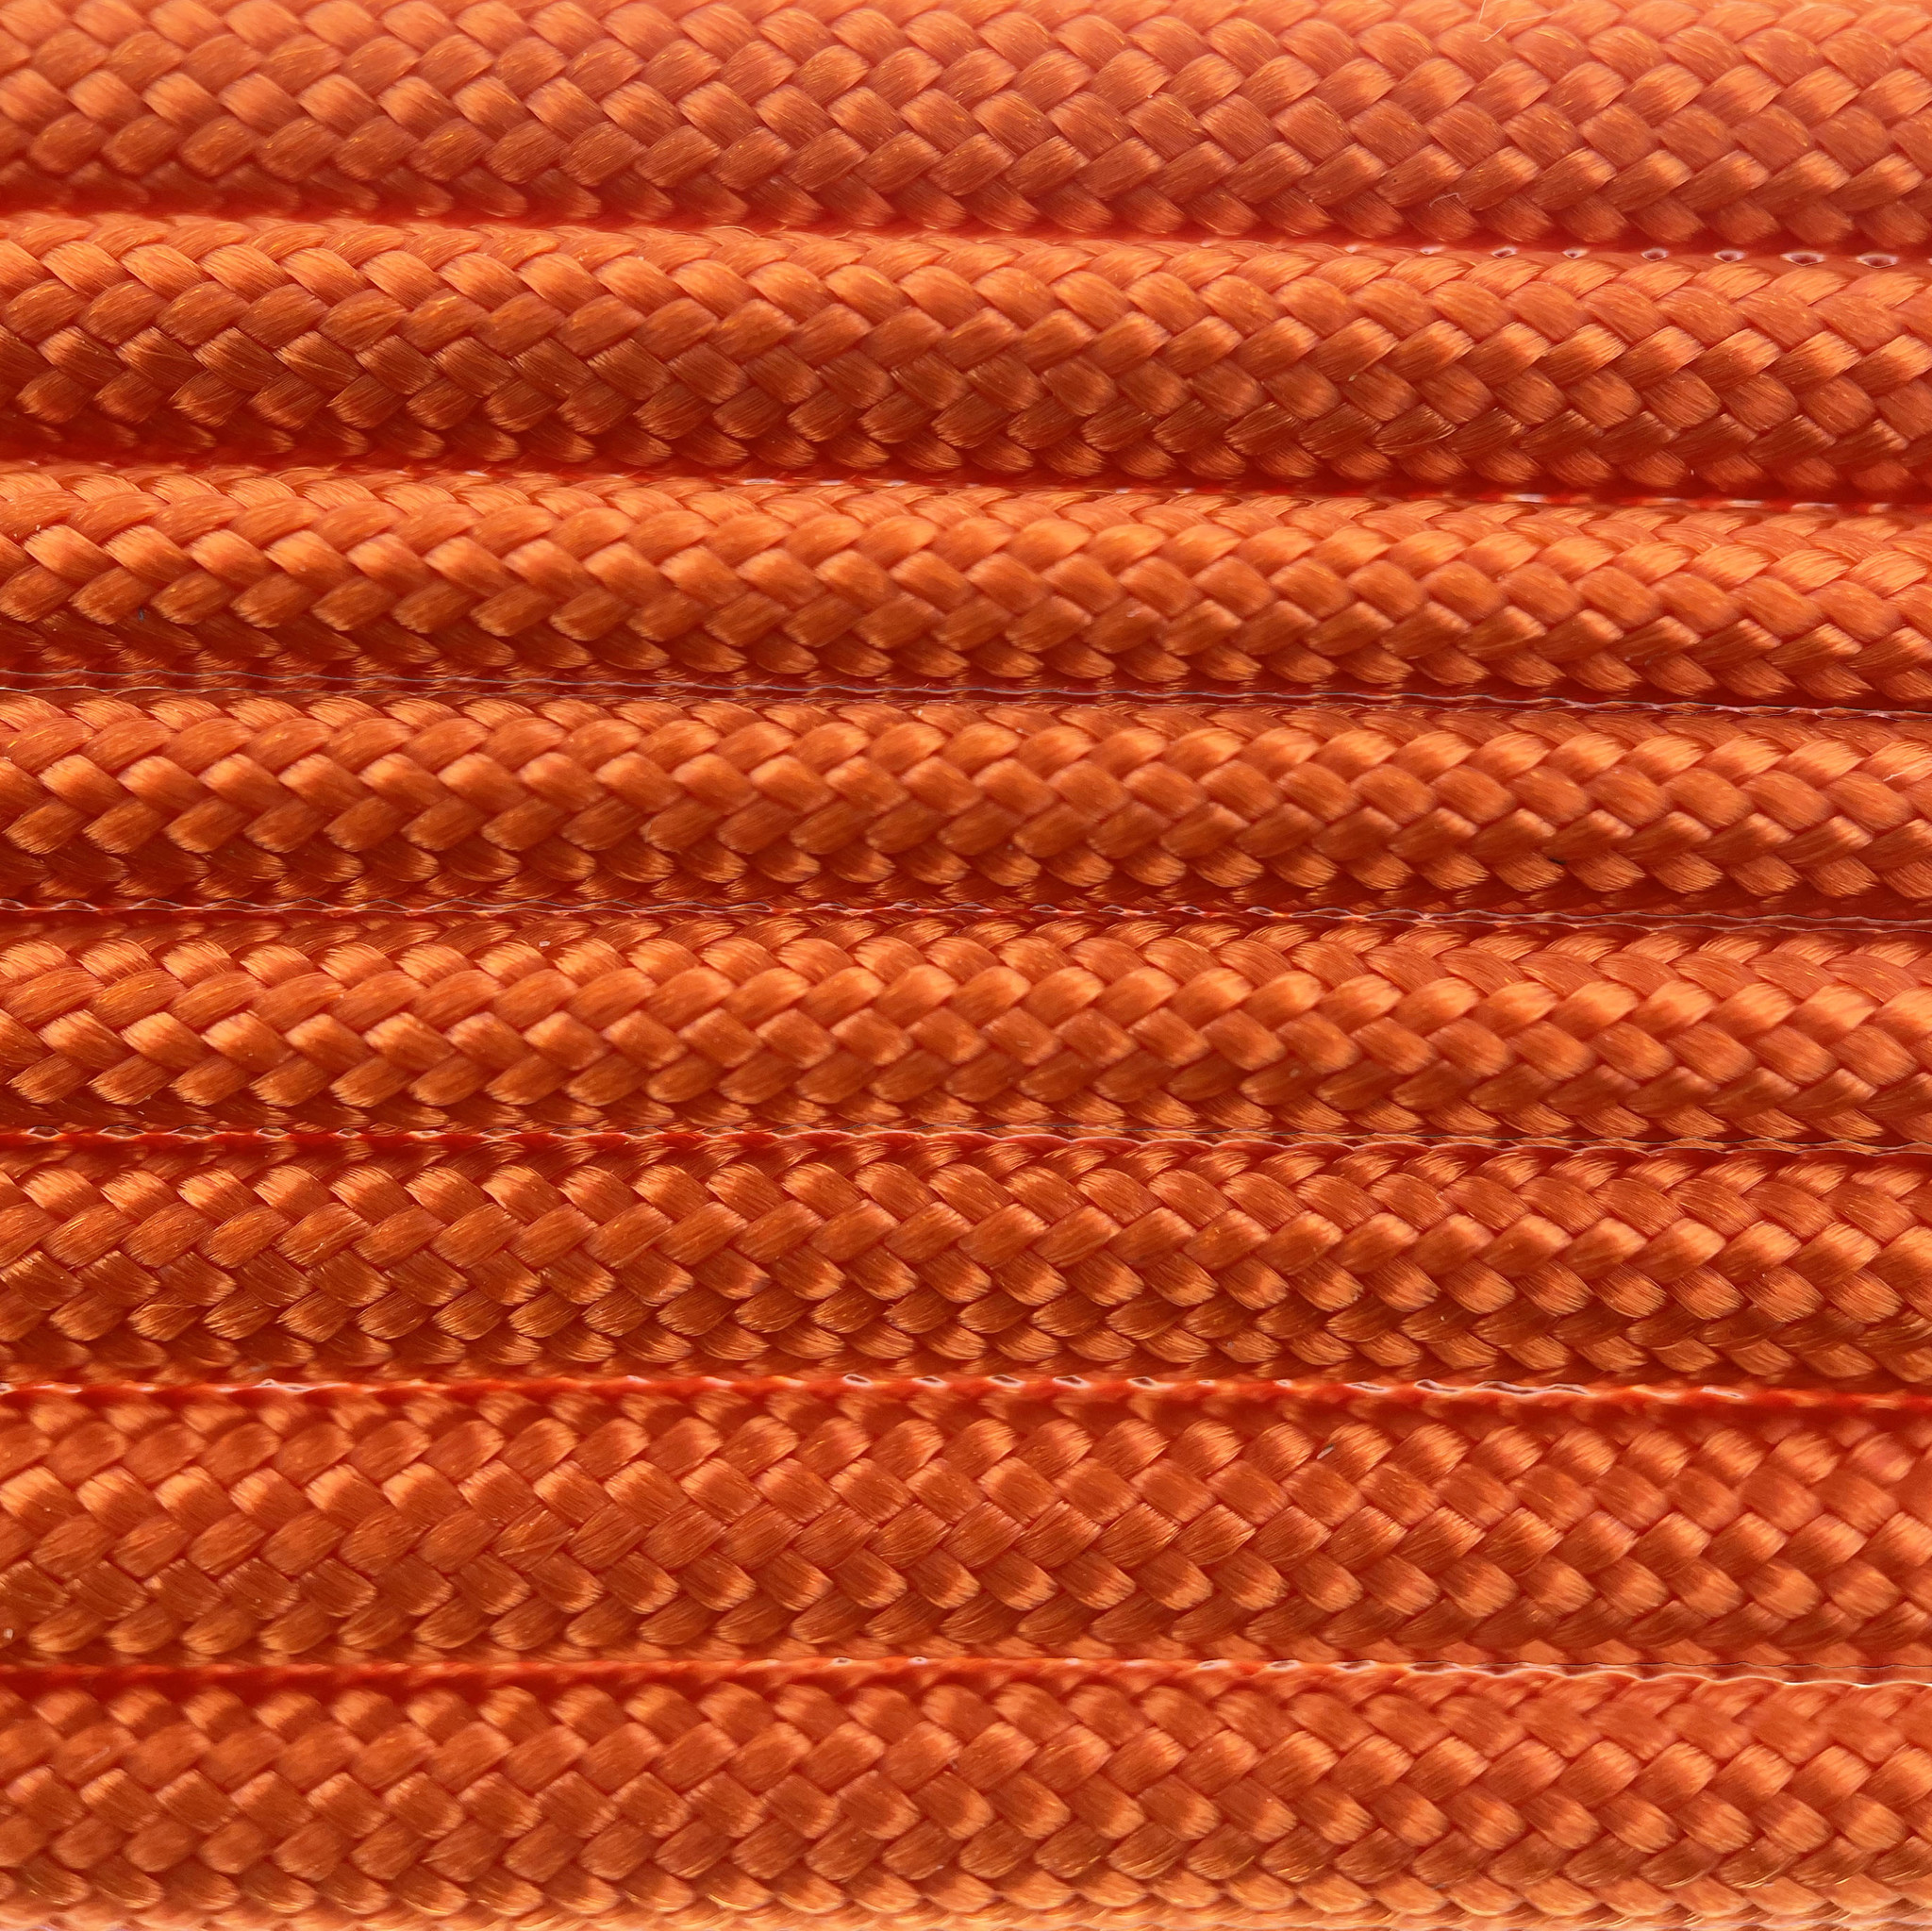 Buy Paracord 550 type III Solar Orange from the expert